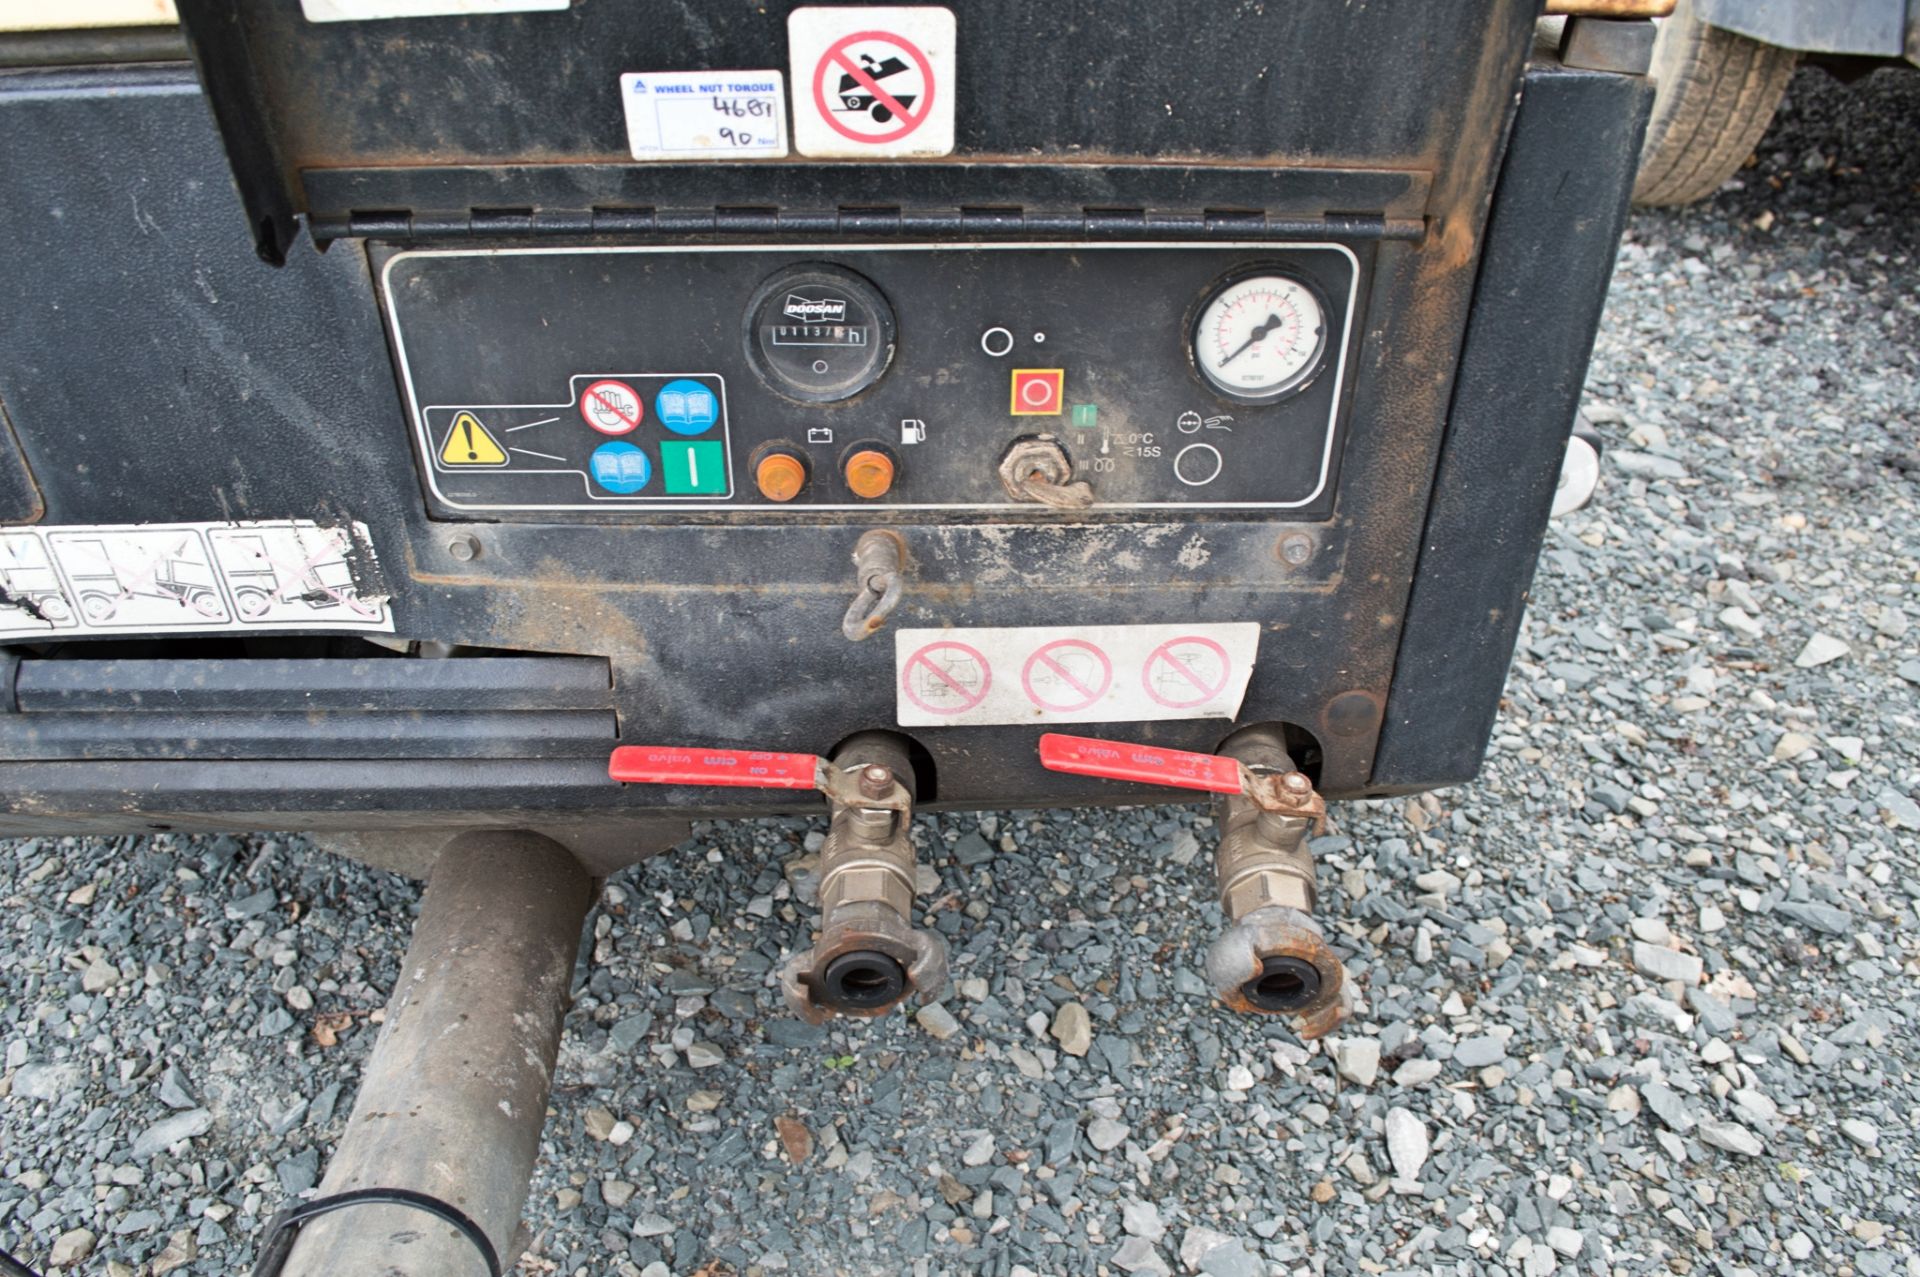 Doosan 7/41 diesel driven mobile air compressor Year: 2014 S/N: 432582 Recorded Hours: 1137 A633581 - Image 3 of 4